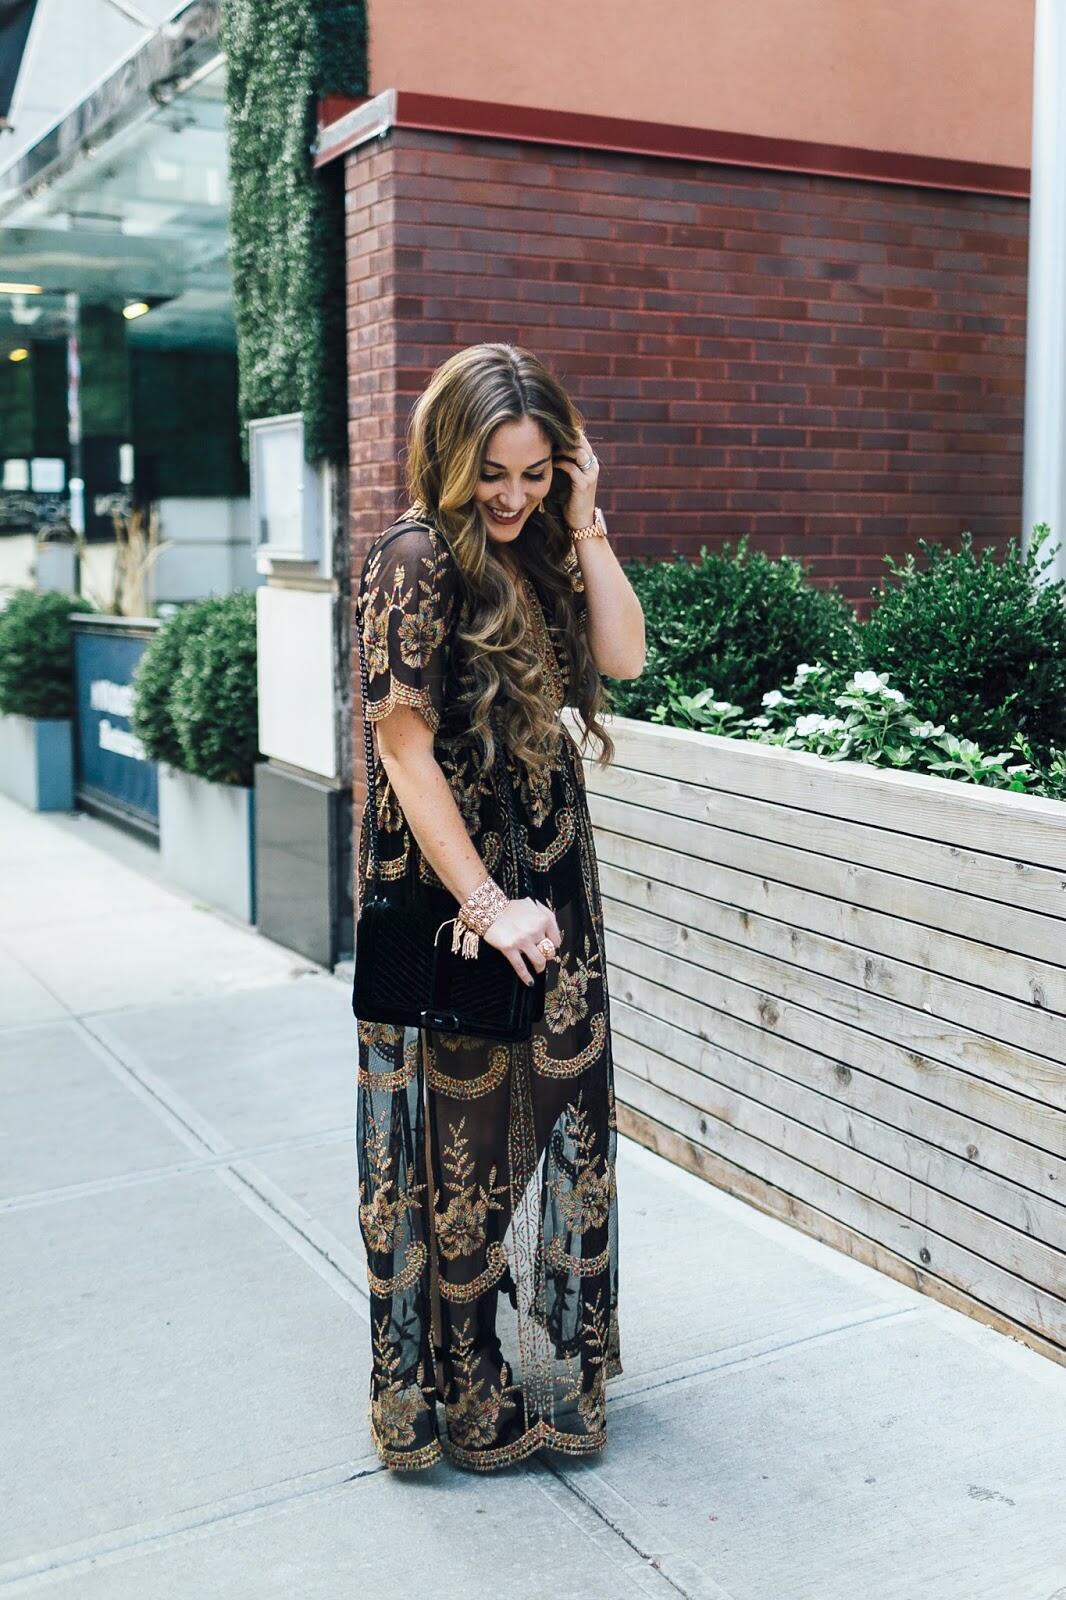 Things to Expect at New York Fashion Week by fashion blogger Walking in Memphis in High Heels